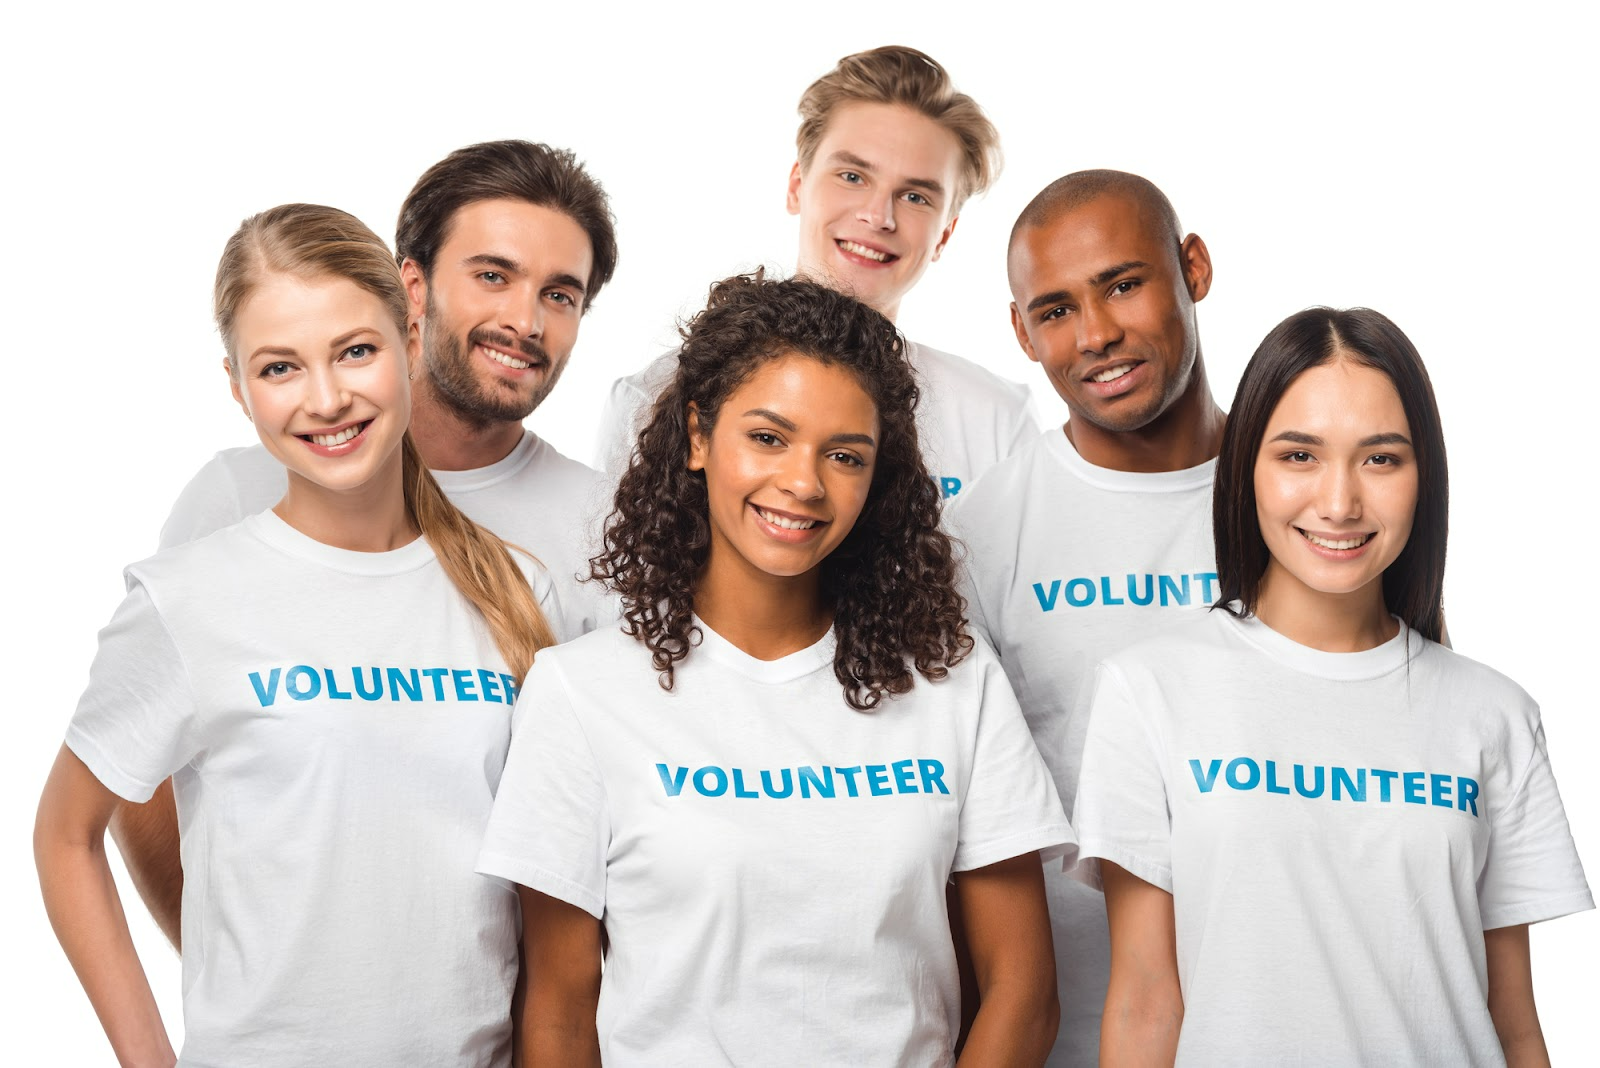 A group of people smiling for the camera, wearing shirts that read “volunteer.”